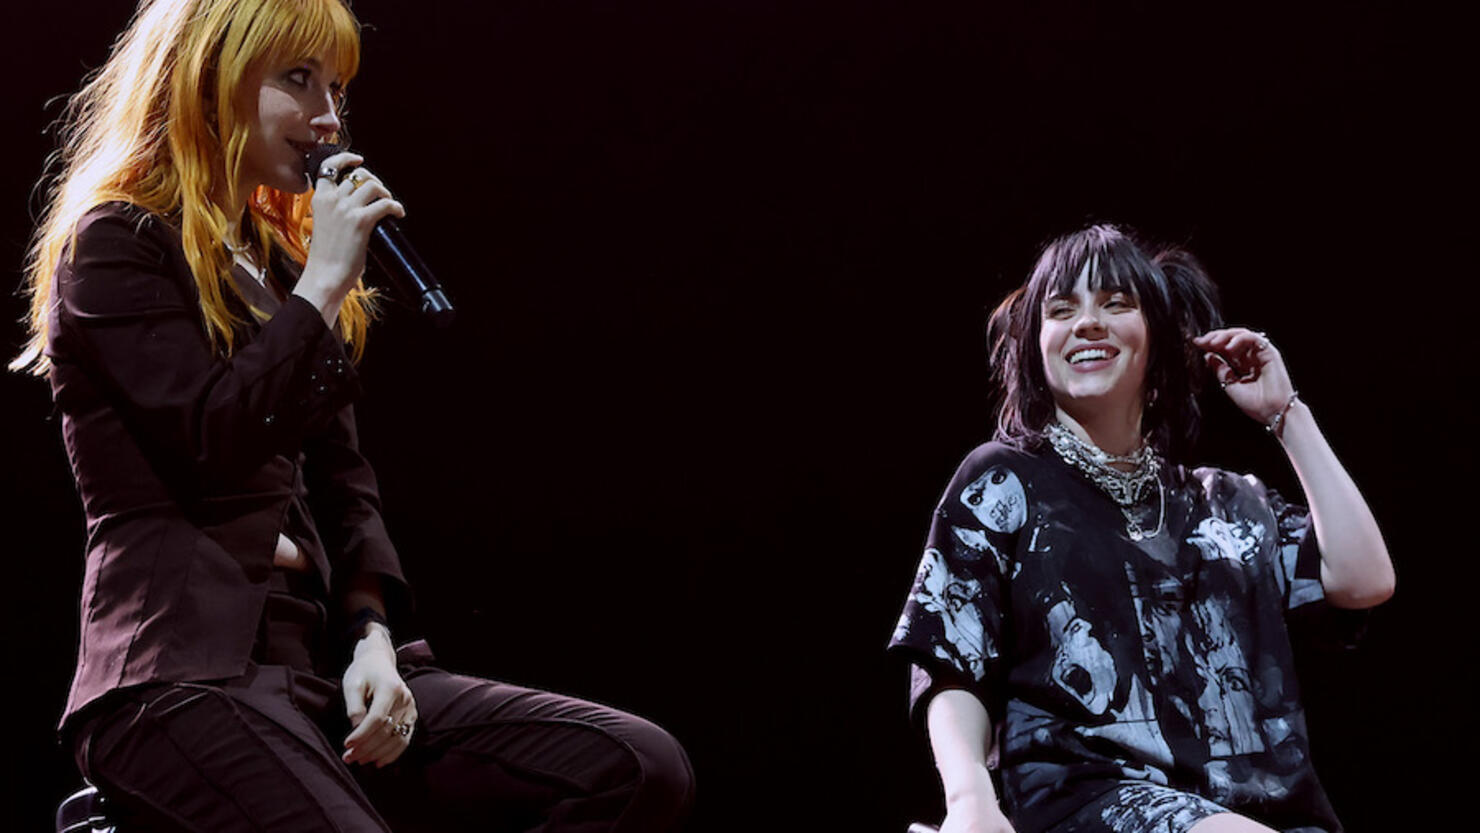 Billie Eilish Says This Is Her 'All-Time Favorite' Paramore Song